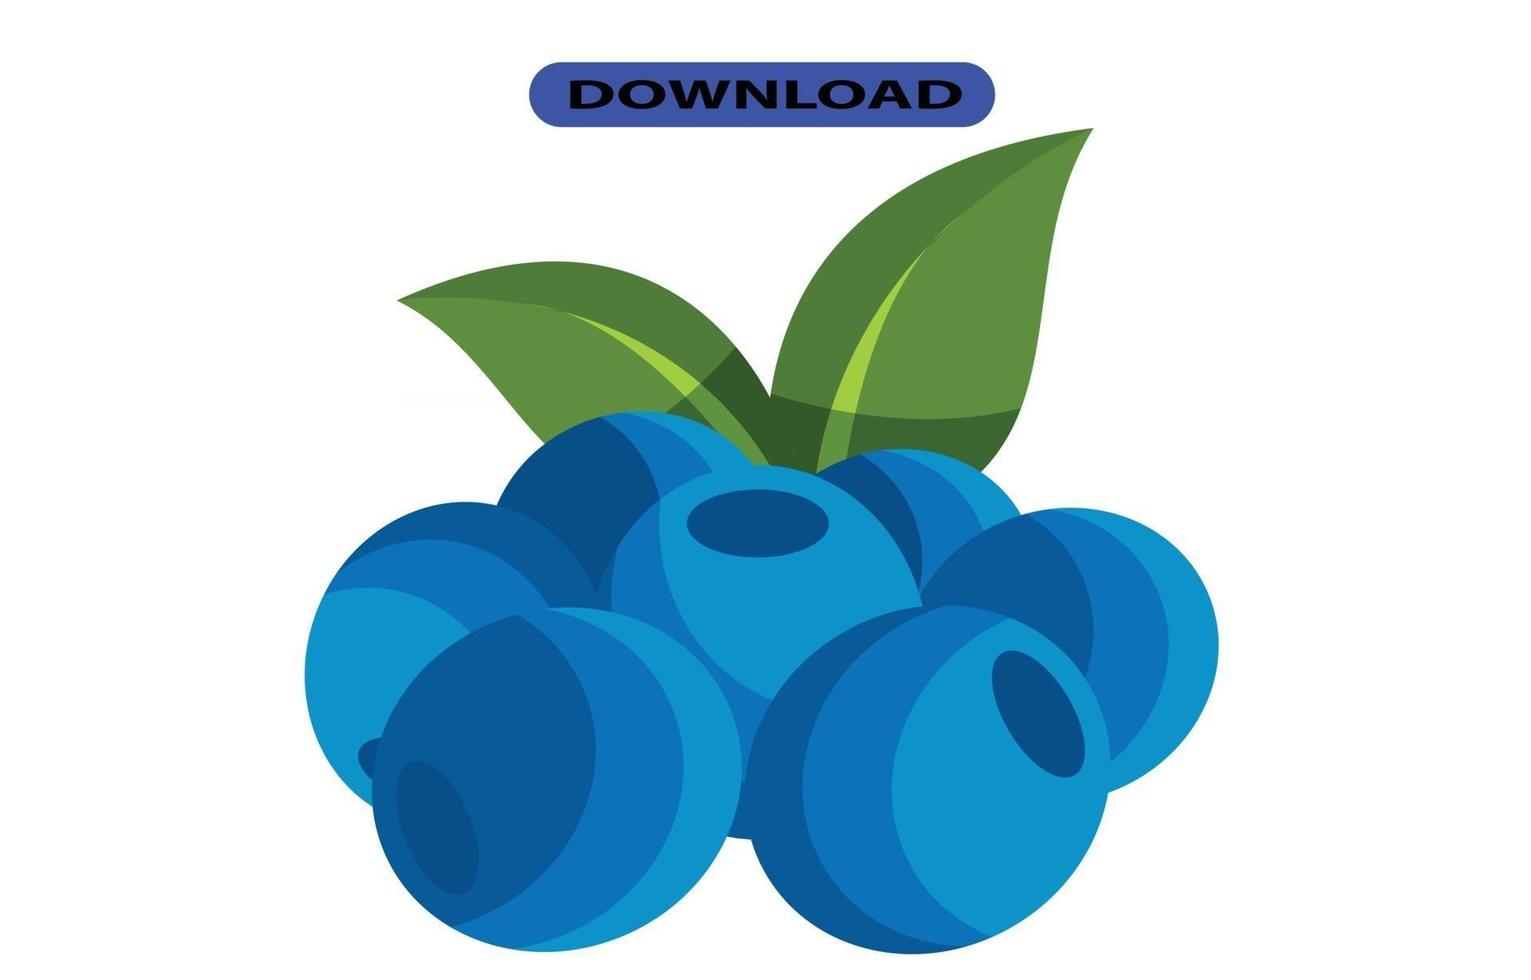 blue berry icon or logo high resolution vector